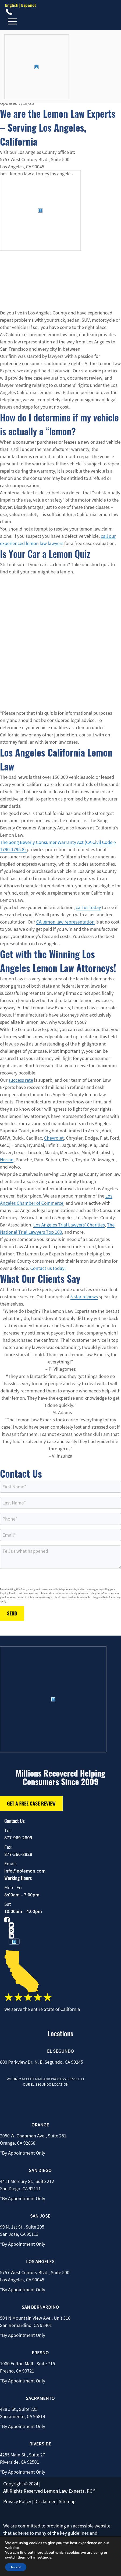 The Lemon Law Experts - Los Angeles CA Lawyers